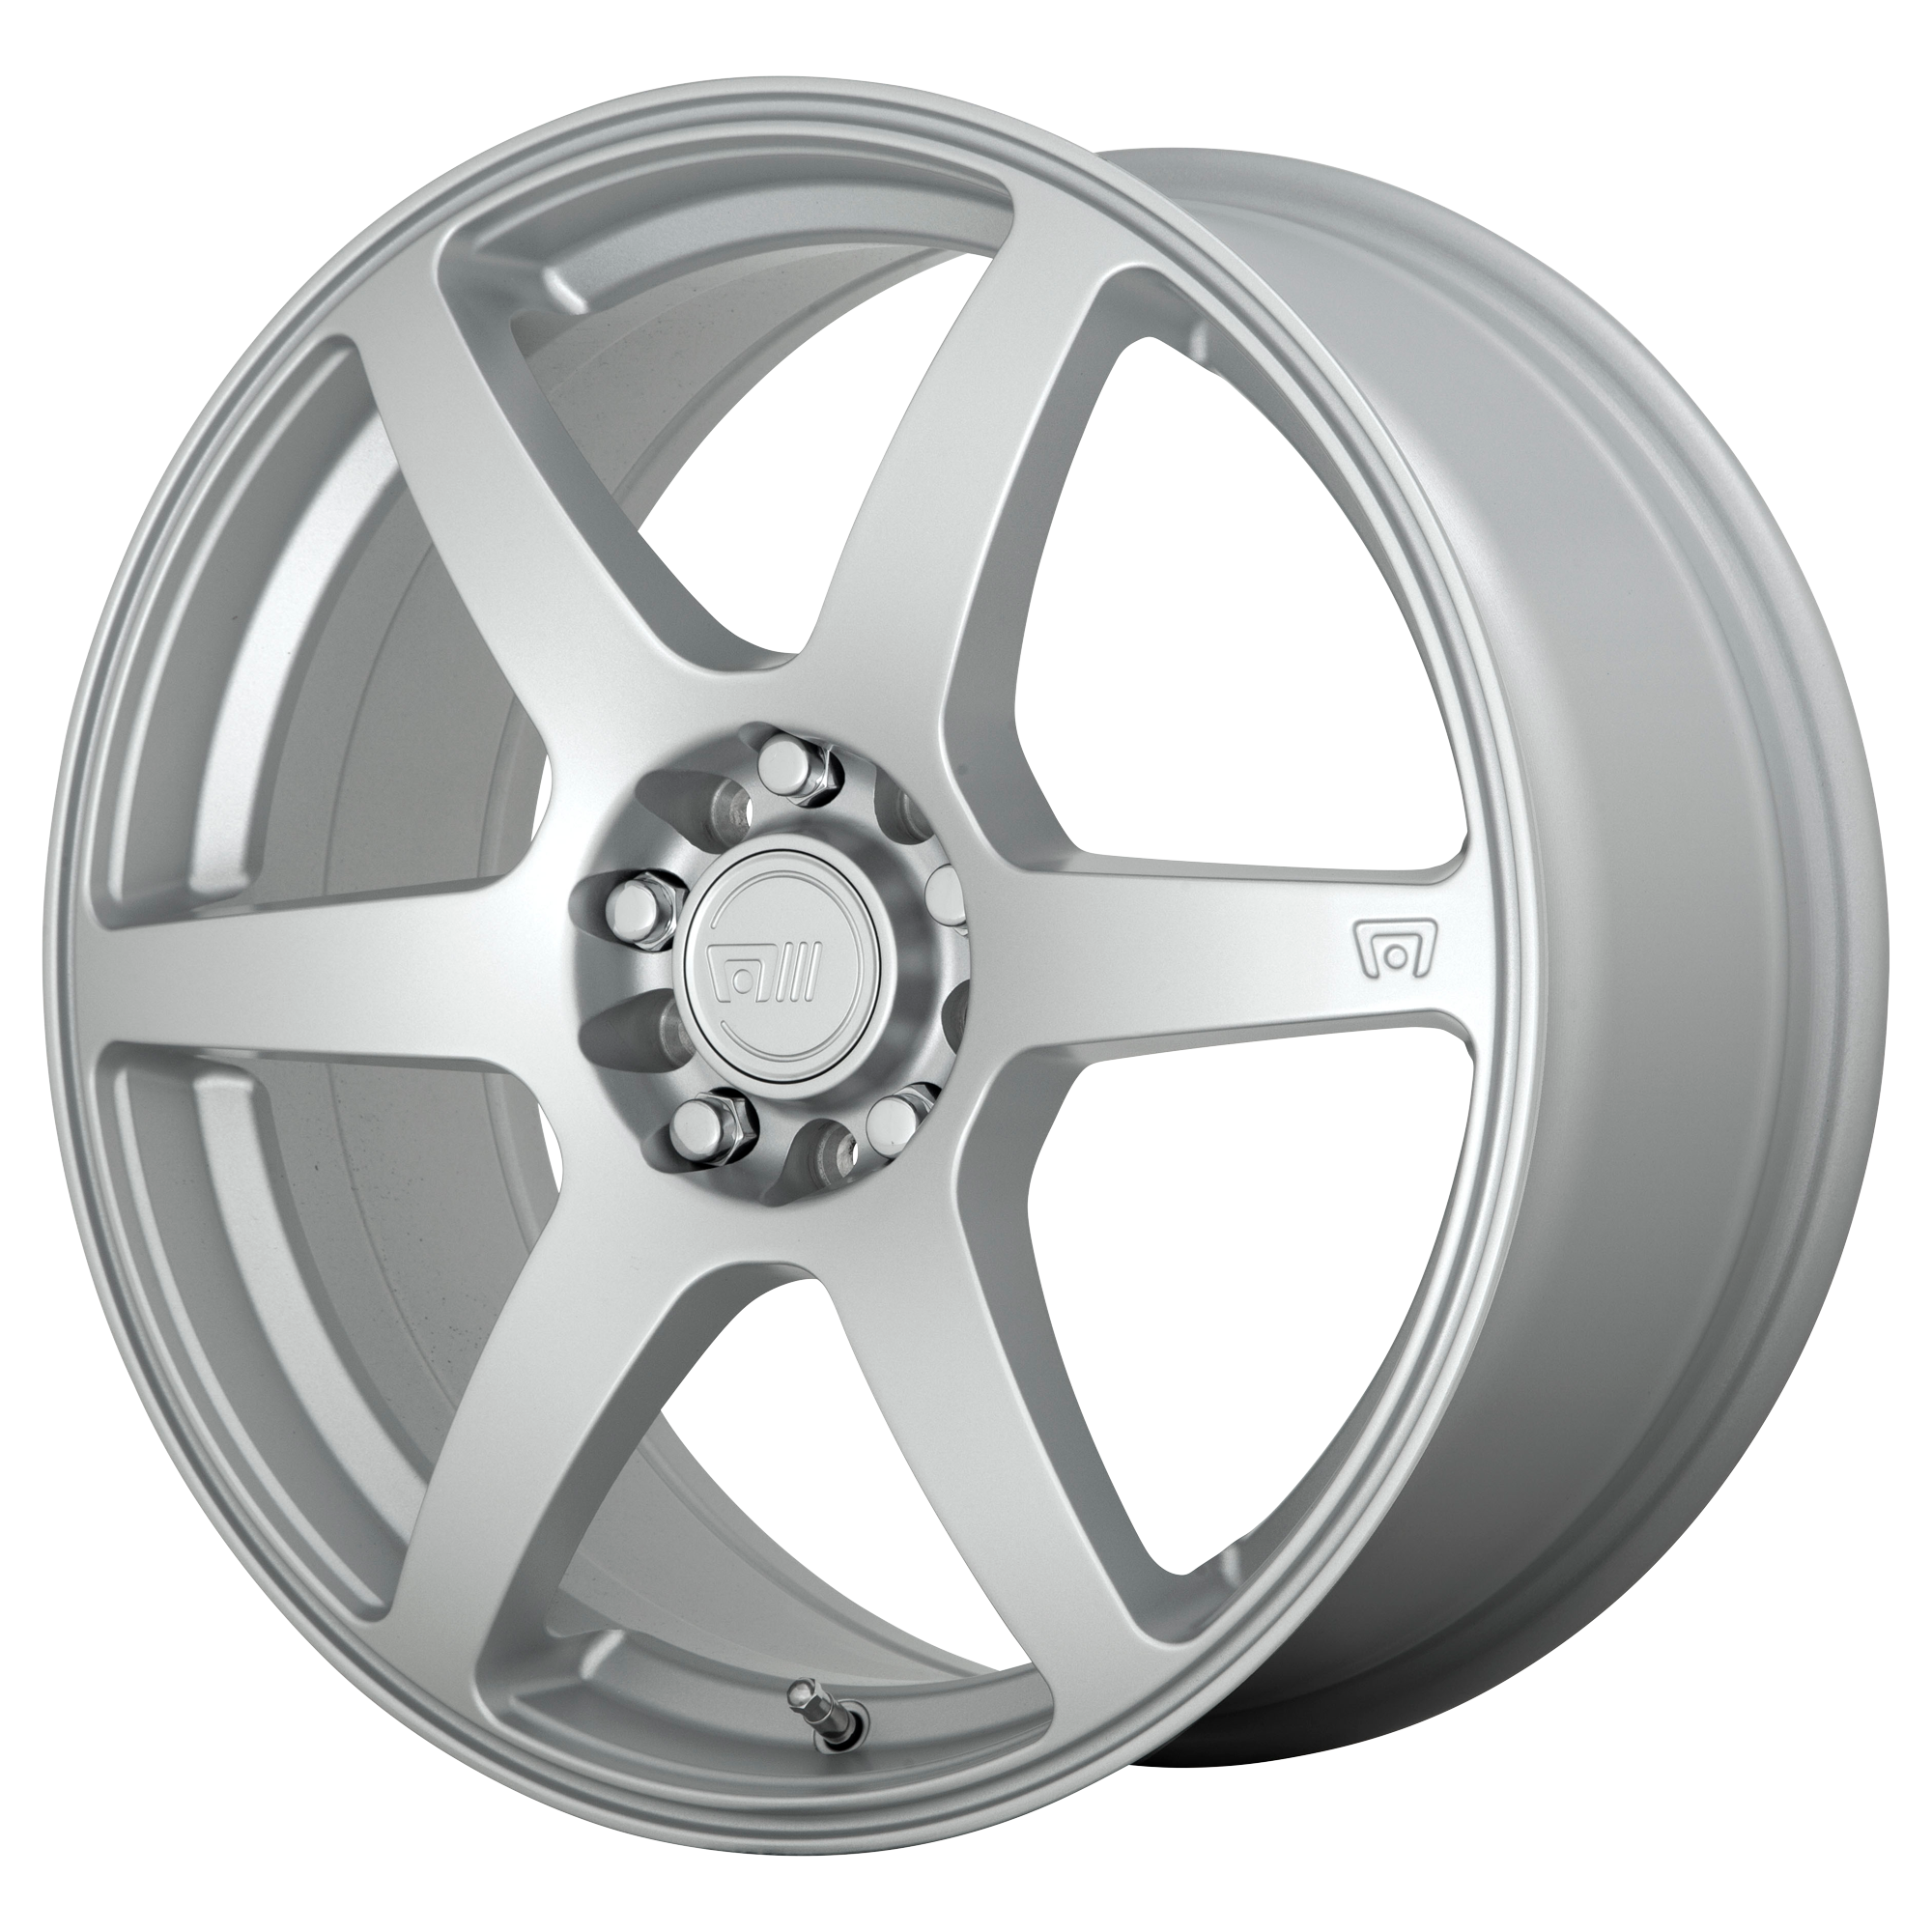 CS6 16x7 5x112.00/5x114.30 HYPER SILVER (40 mm) - Tires and Engine Performance